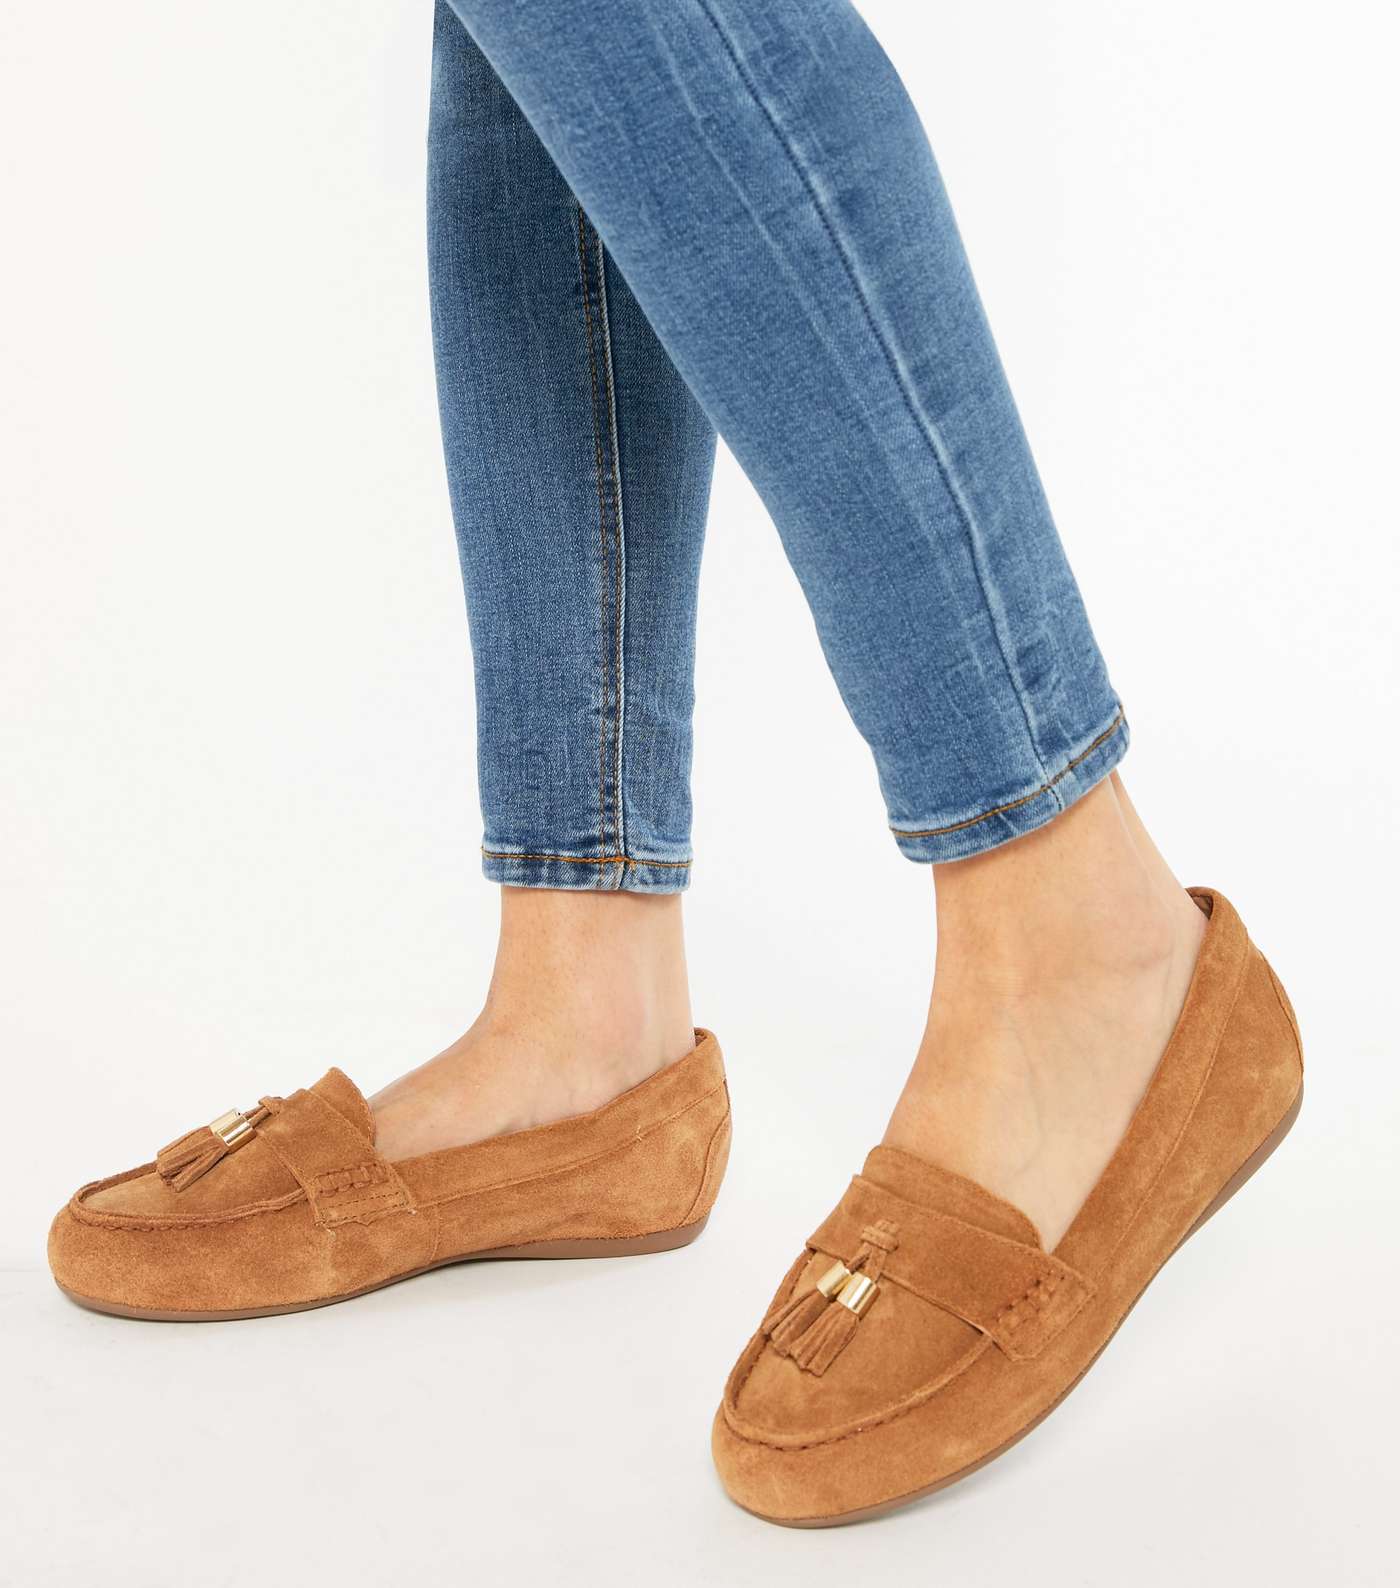 Wide Fit Tan Suede Tassel Trim Loafers Image 2